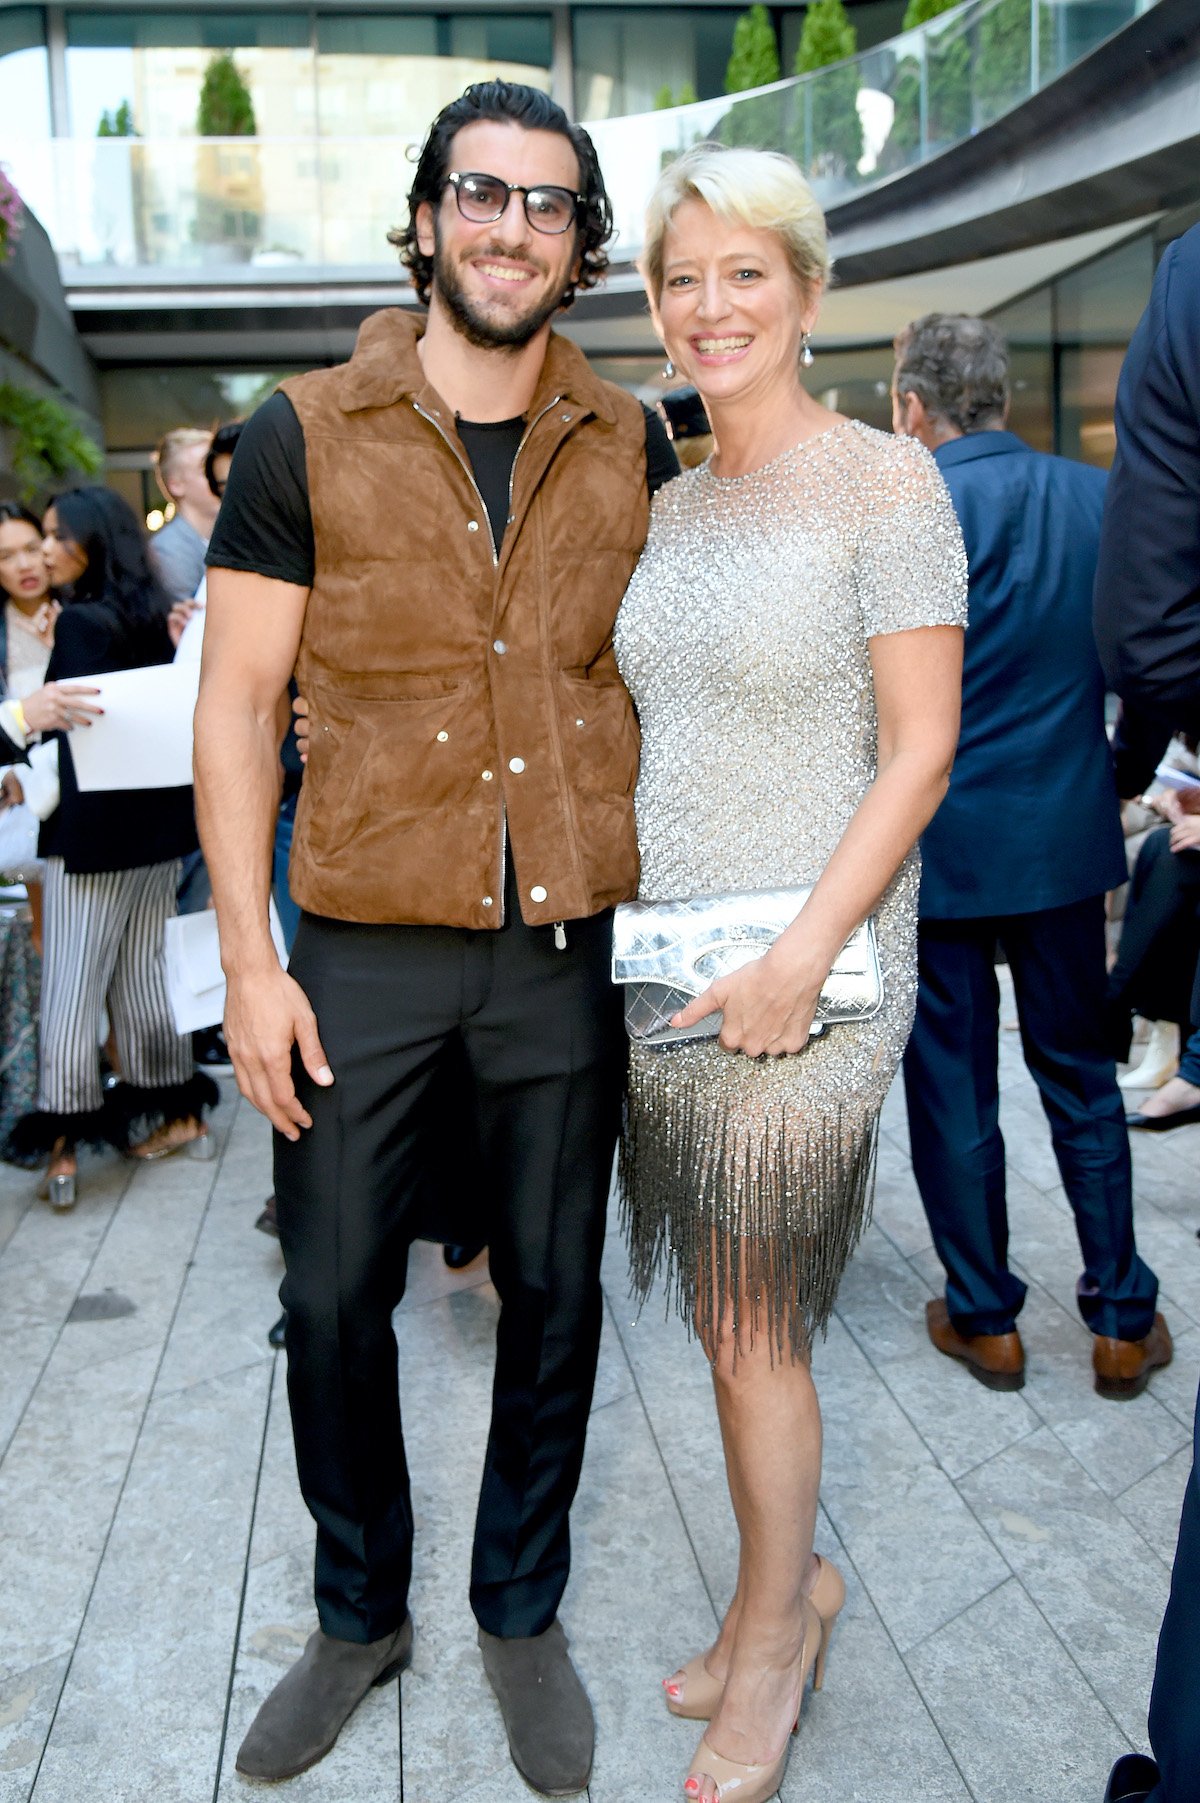 Steve Gold from Million Dollar Listing New York and Dorinda Medley from The Real Housewives of New York City attend New York Fashion Week in 2019